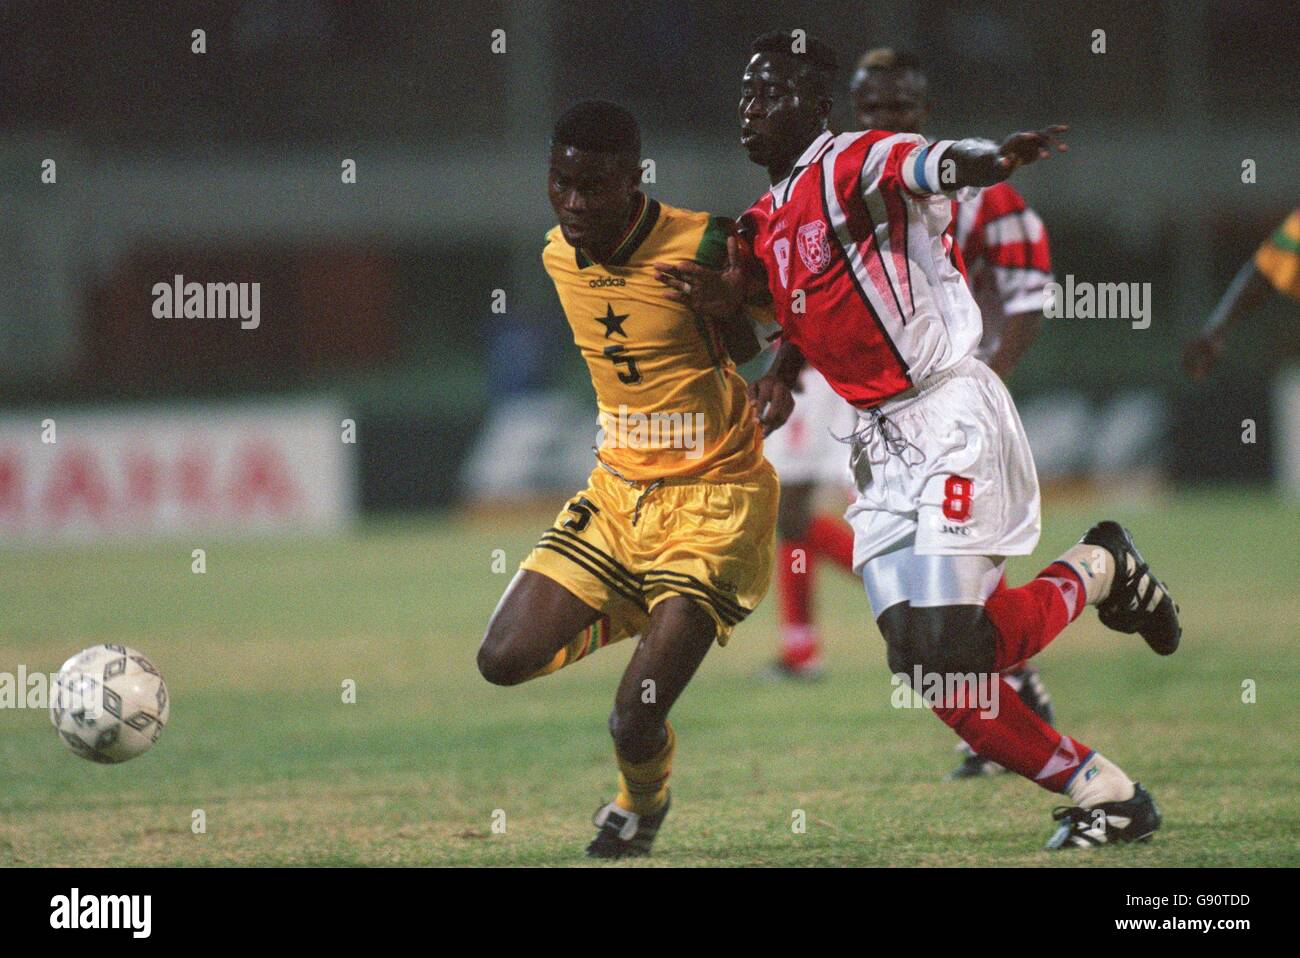 Soccer - African Nations Cup - Ghana v Togo. Eric Pappoe Addo of Ghana (left) and Ouadja Lantame of Togo (right) battle for the ball Stock Photo